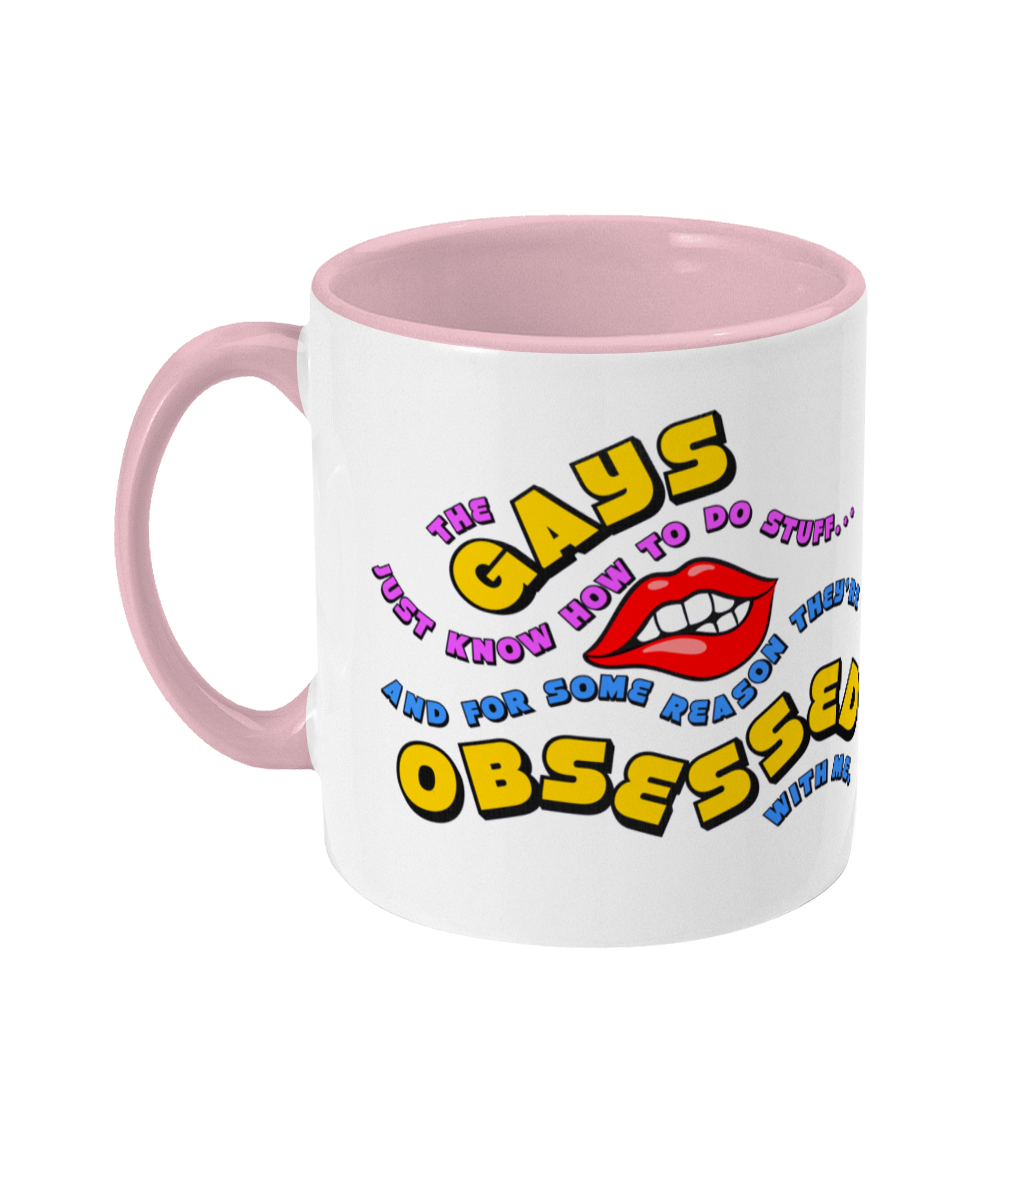 They're Obsessed With Me Mug